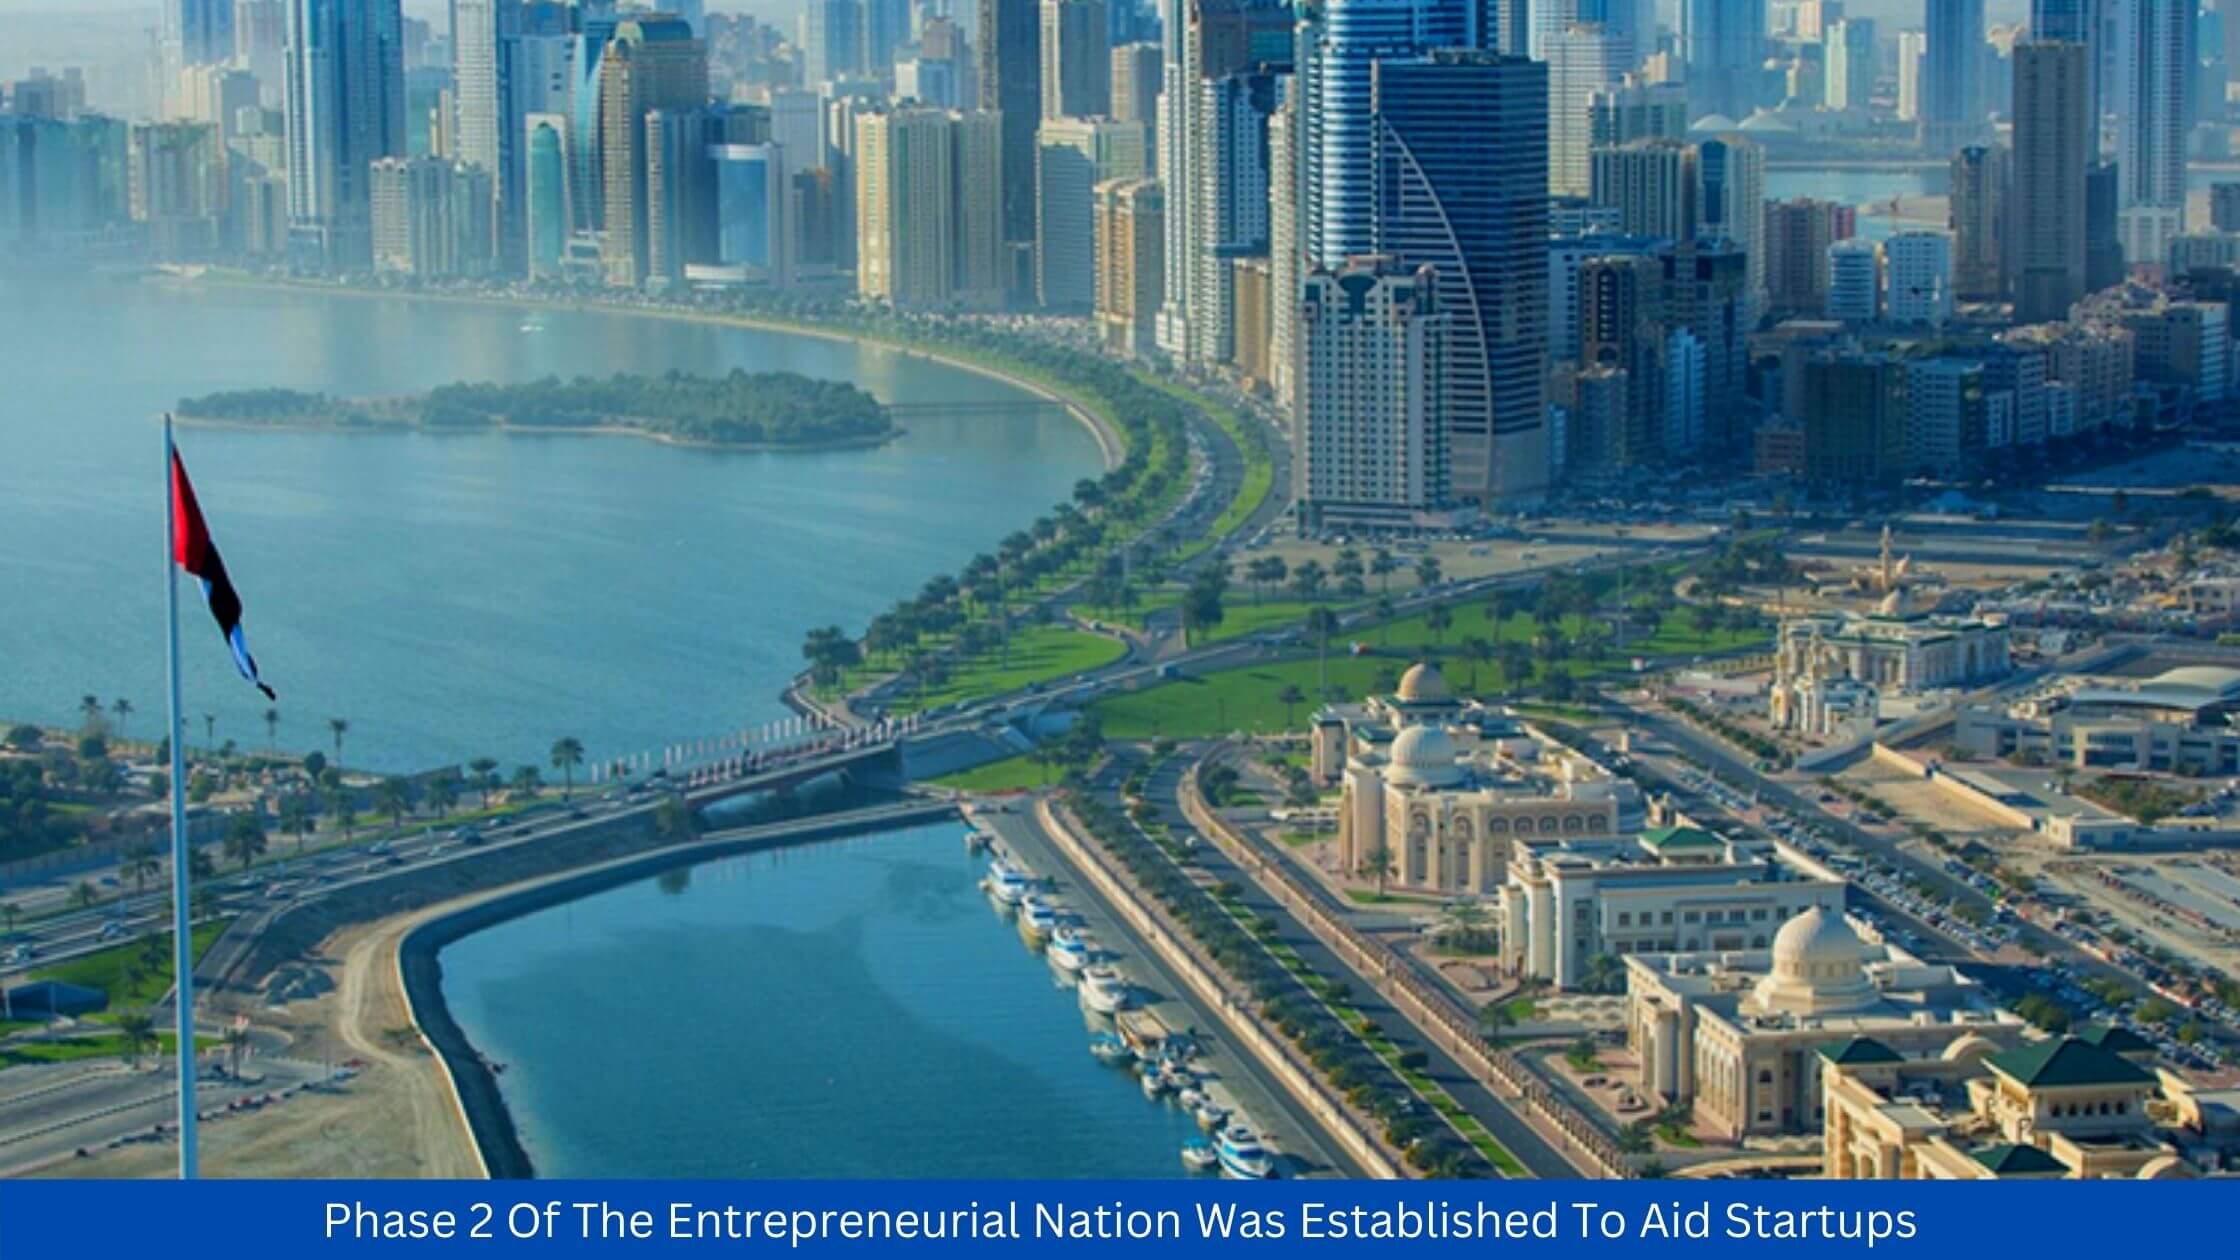 Phase 2 Of The Entrepreneurial Nation Was Established To Aid Startups